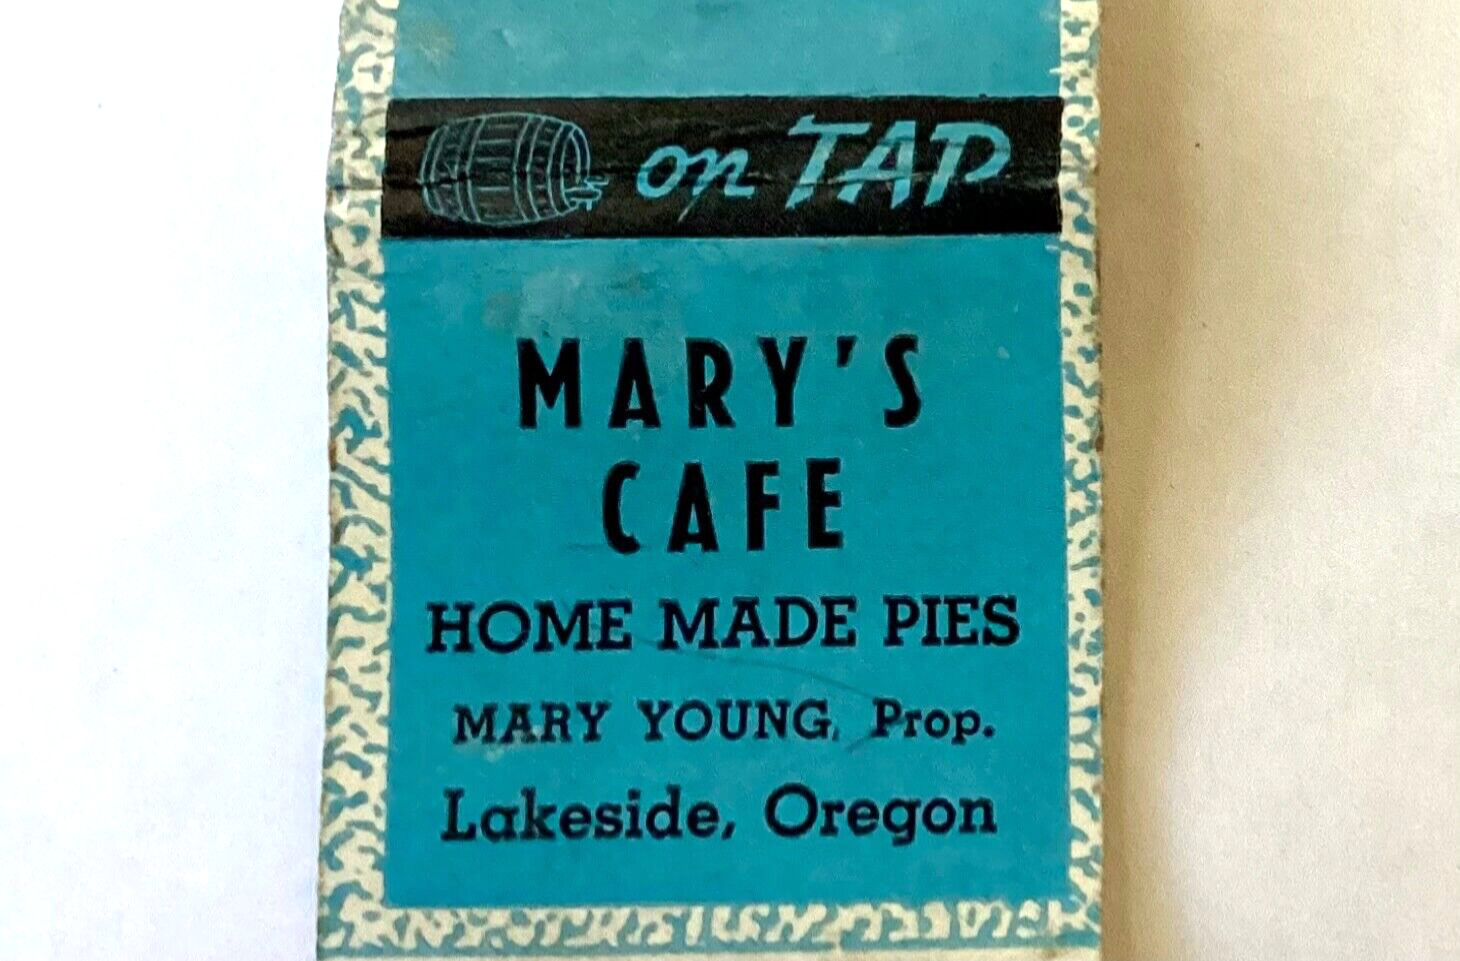 1930’S LAKESIDE, OREGON-MARY’S CAFE, H.G. BRACE CO, SEATTLE, OR MATCHBOOK COVER